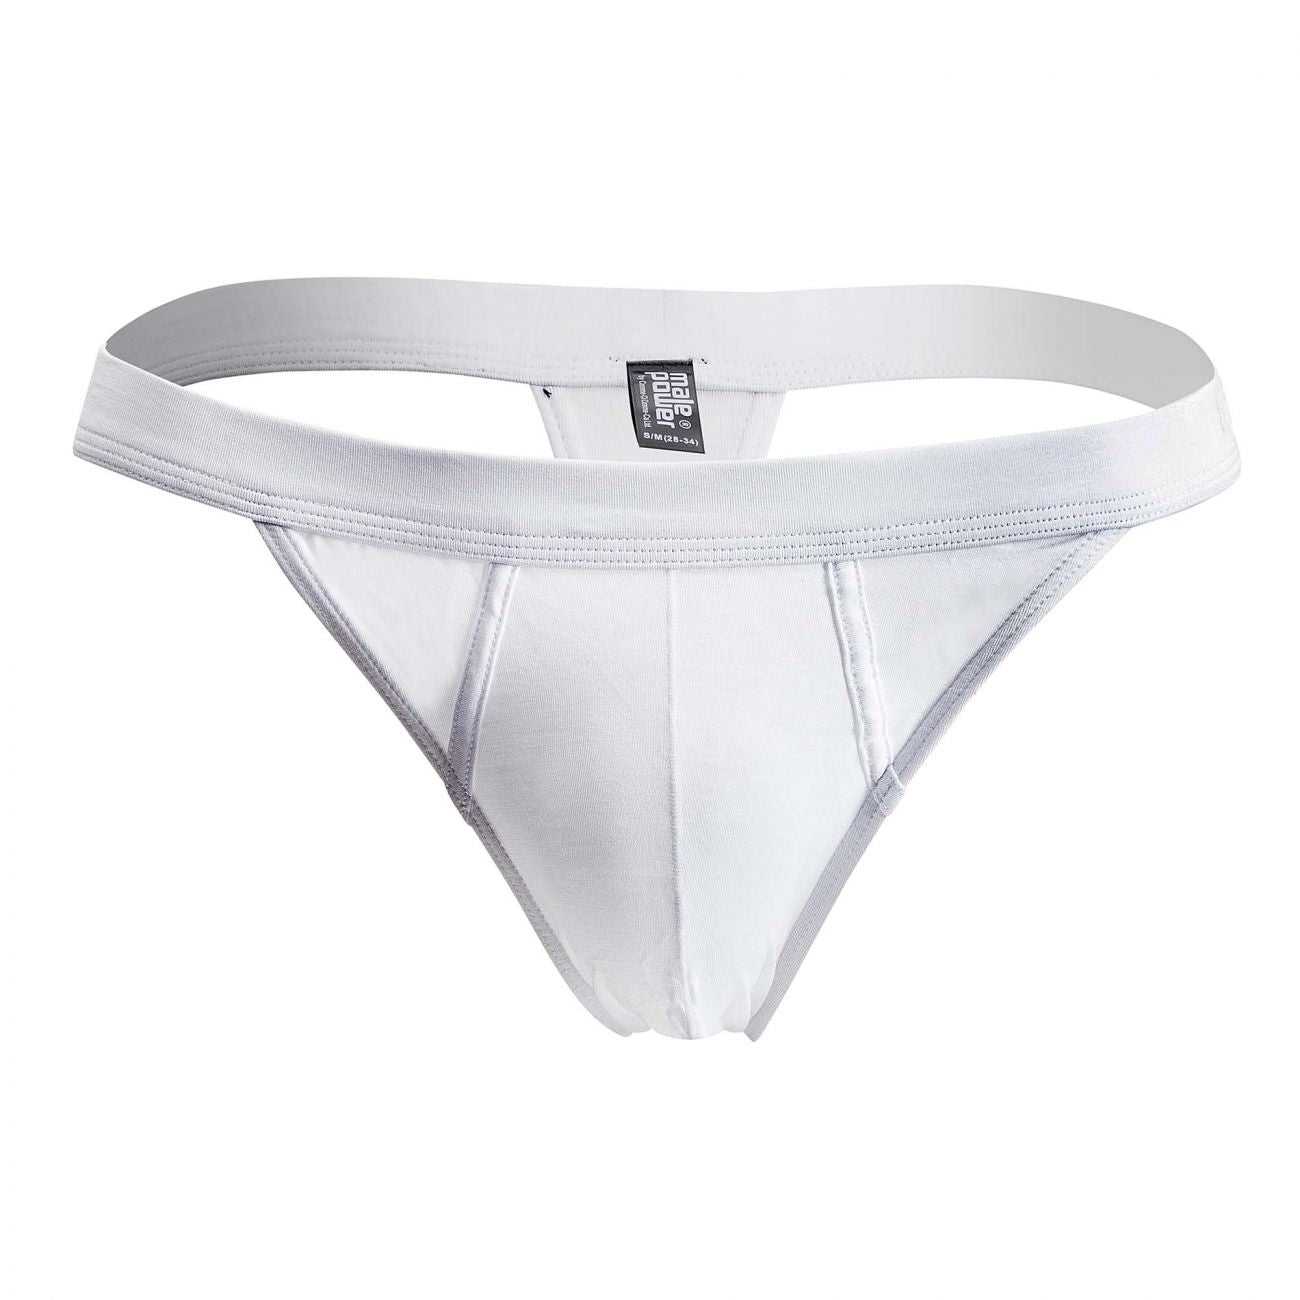 Male Power 436-257 Pure Comfort Sexy Thong